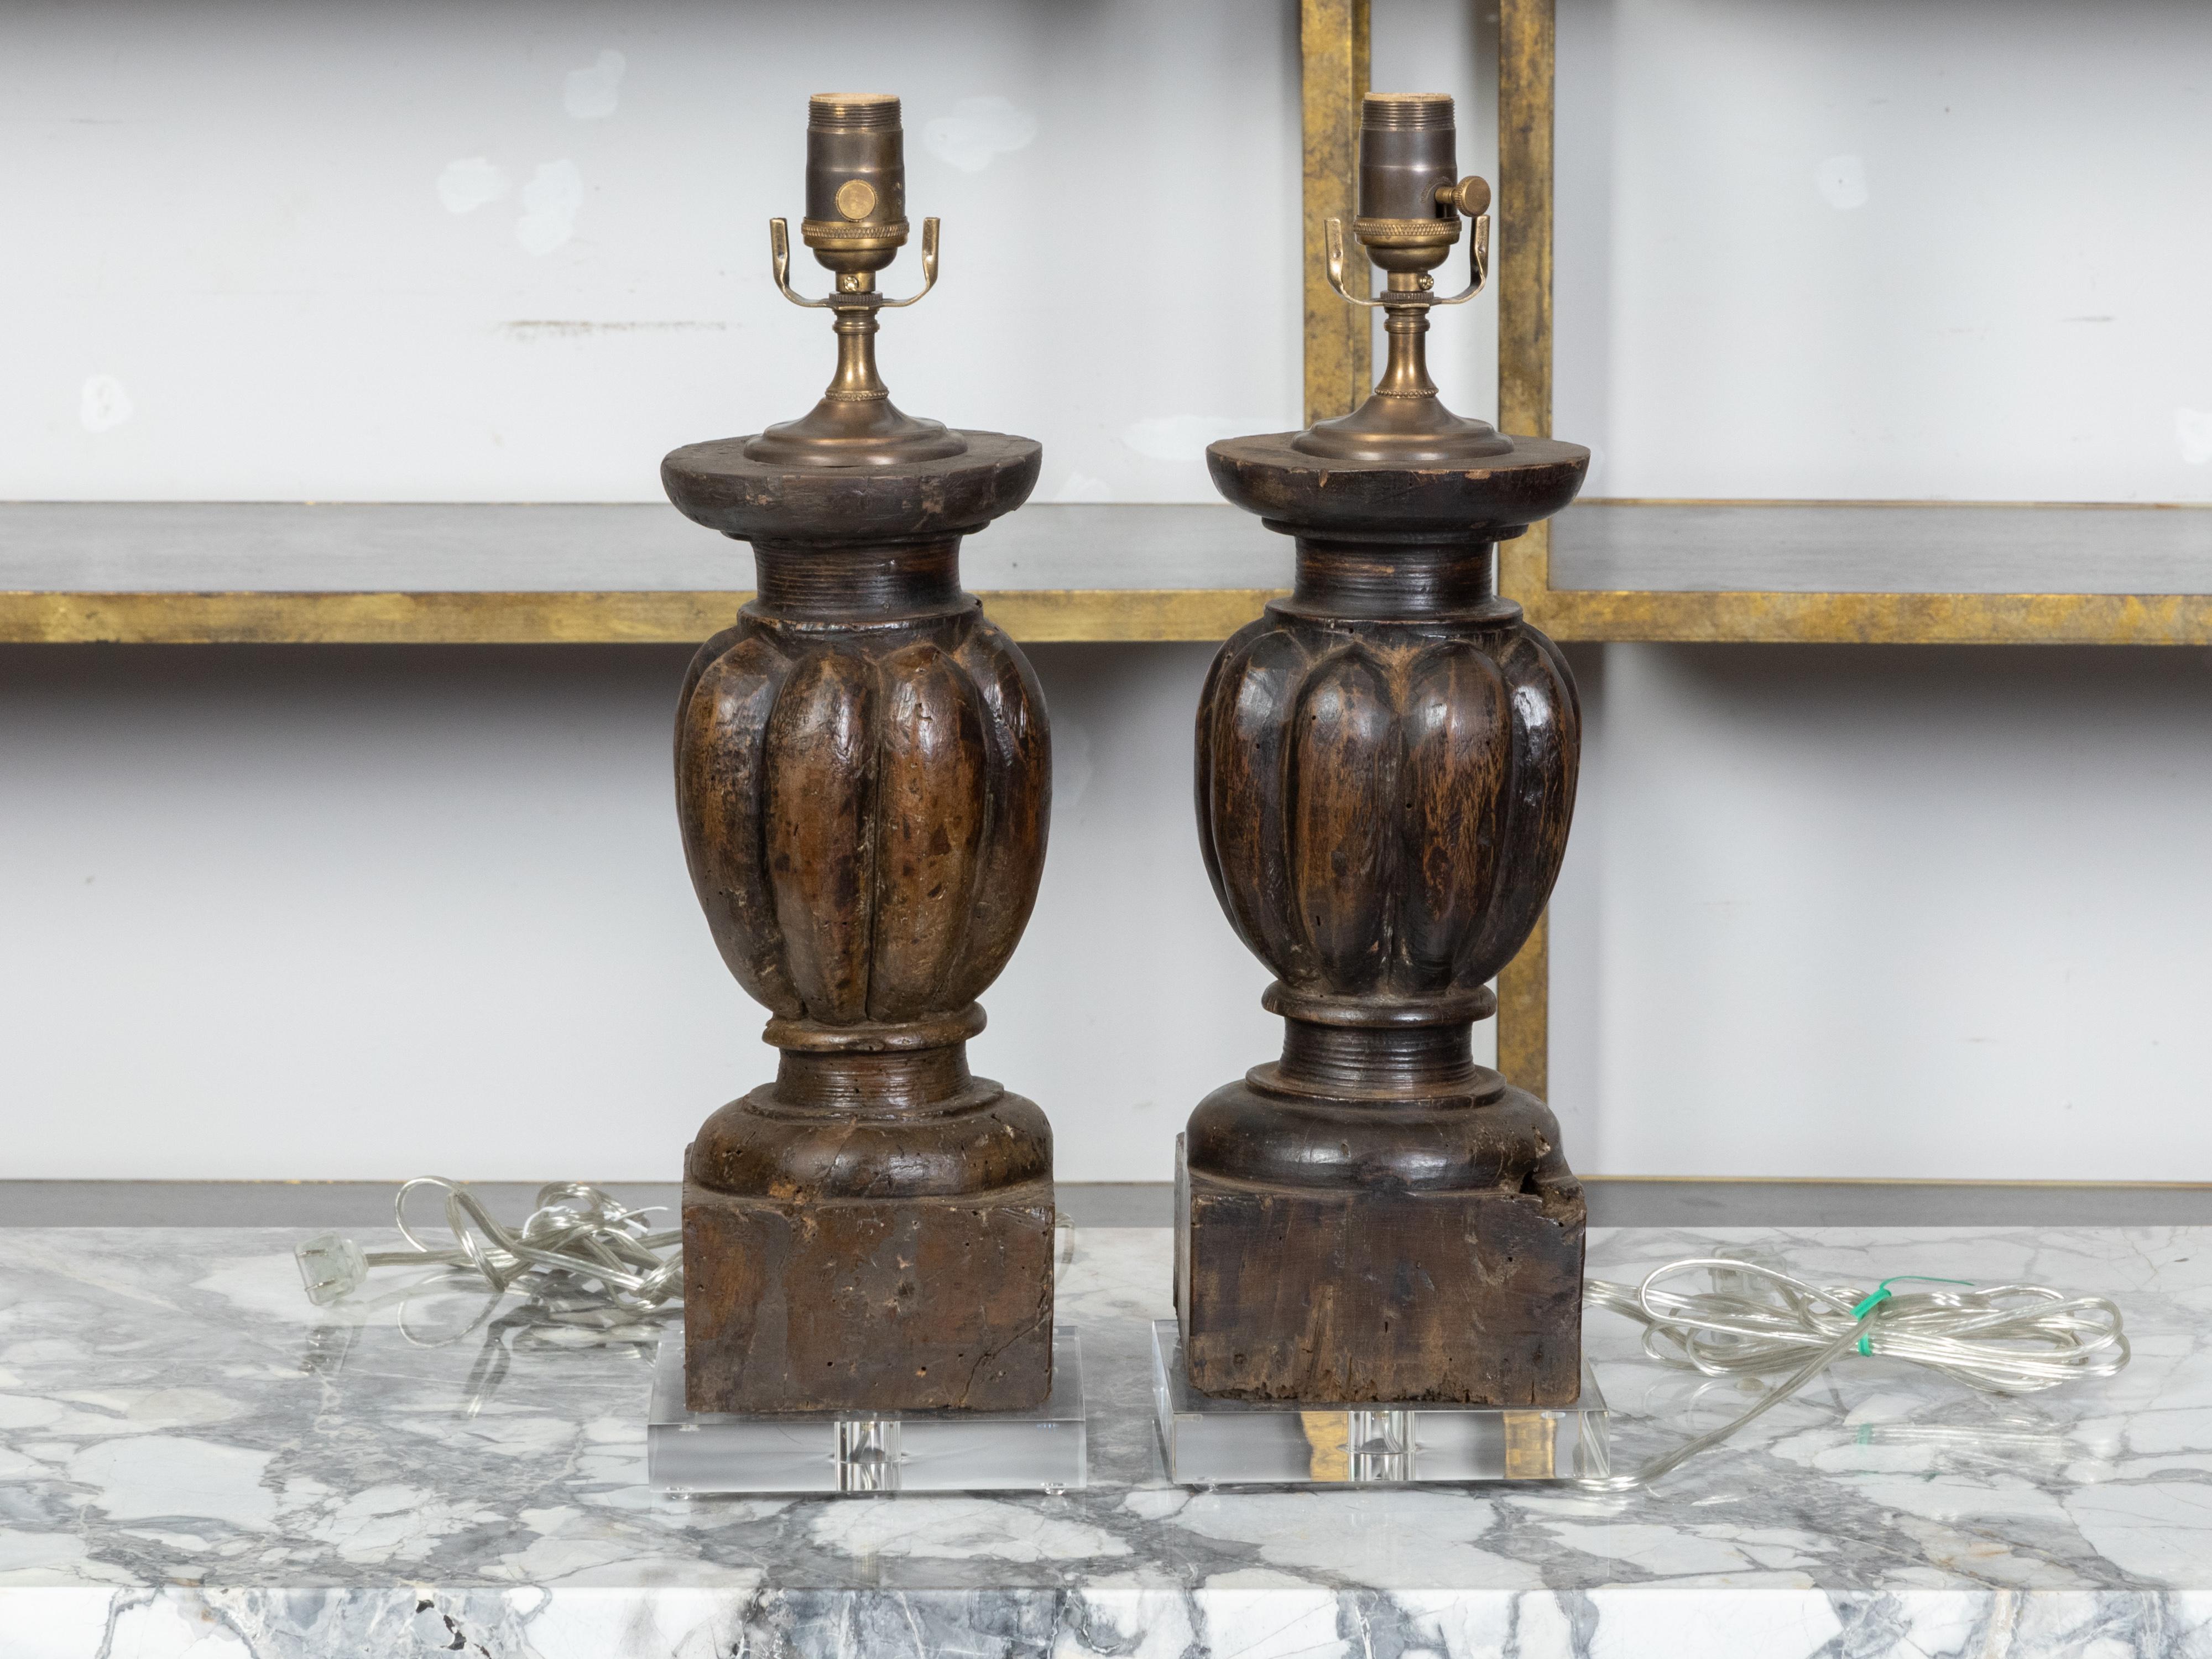 A pair of Italian carved wooden fragments from the 18th century depicting balusters with gadroon motifs, made into US wired table lamps mounted on square lucite bases. Created in Italy during the later years of the 18th century, each of this pair of